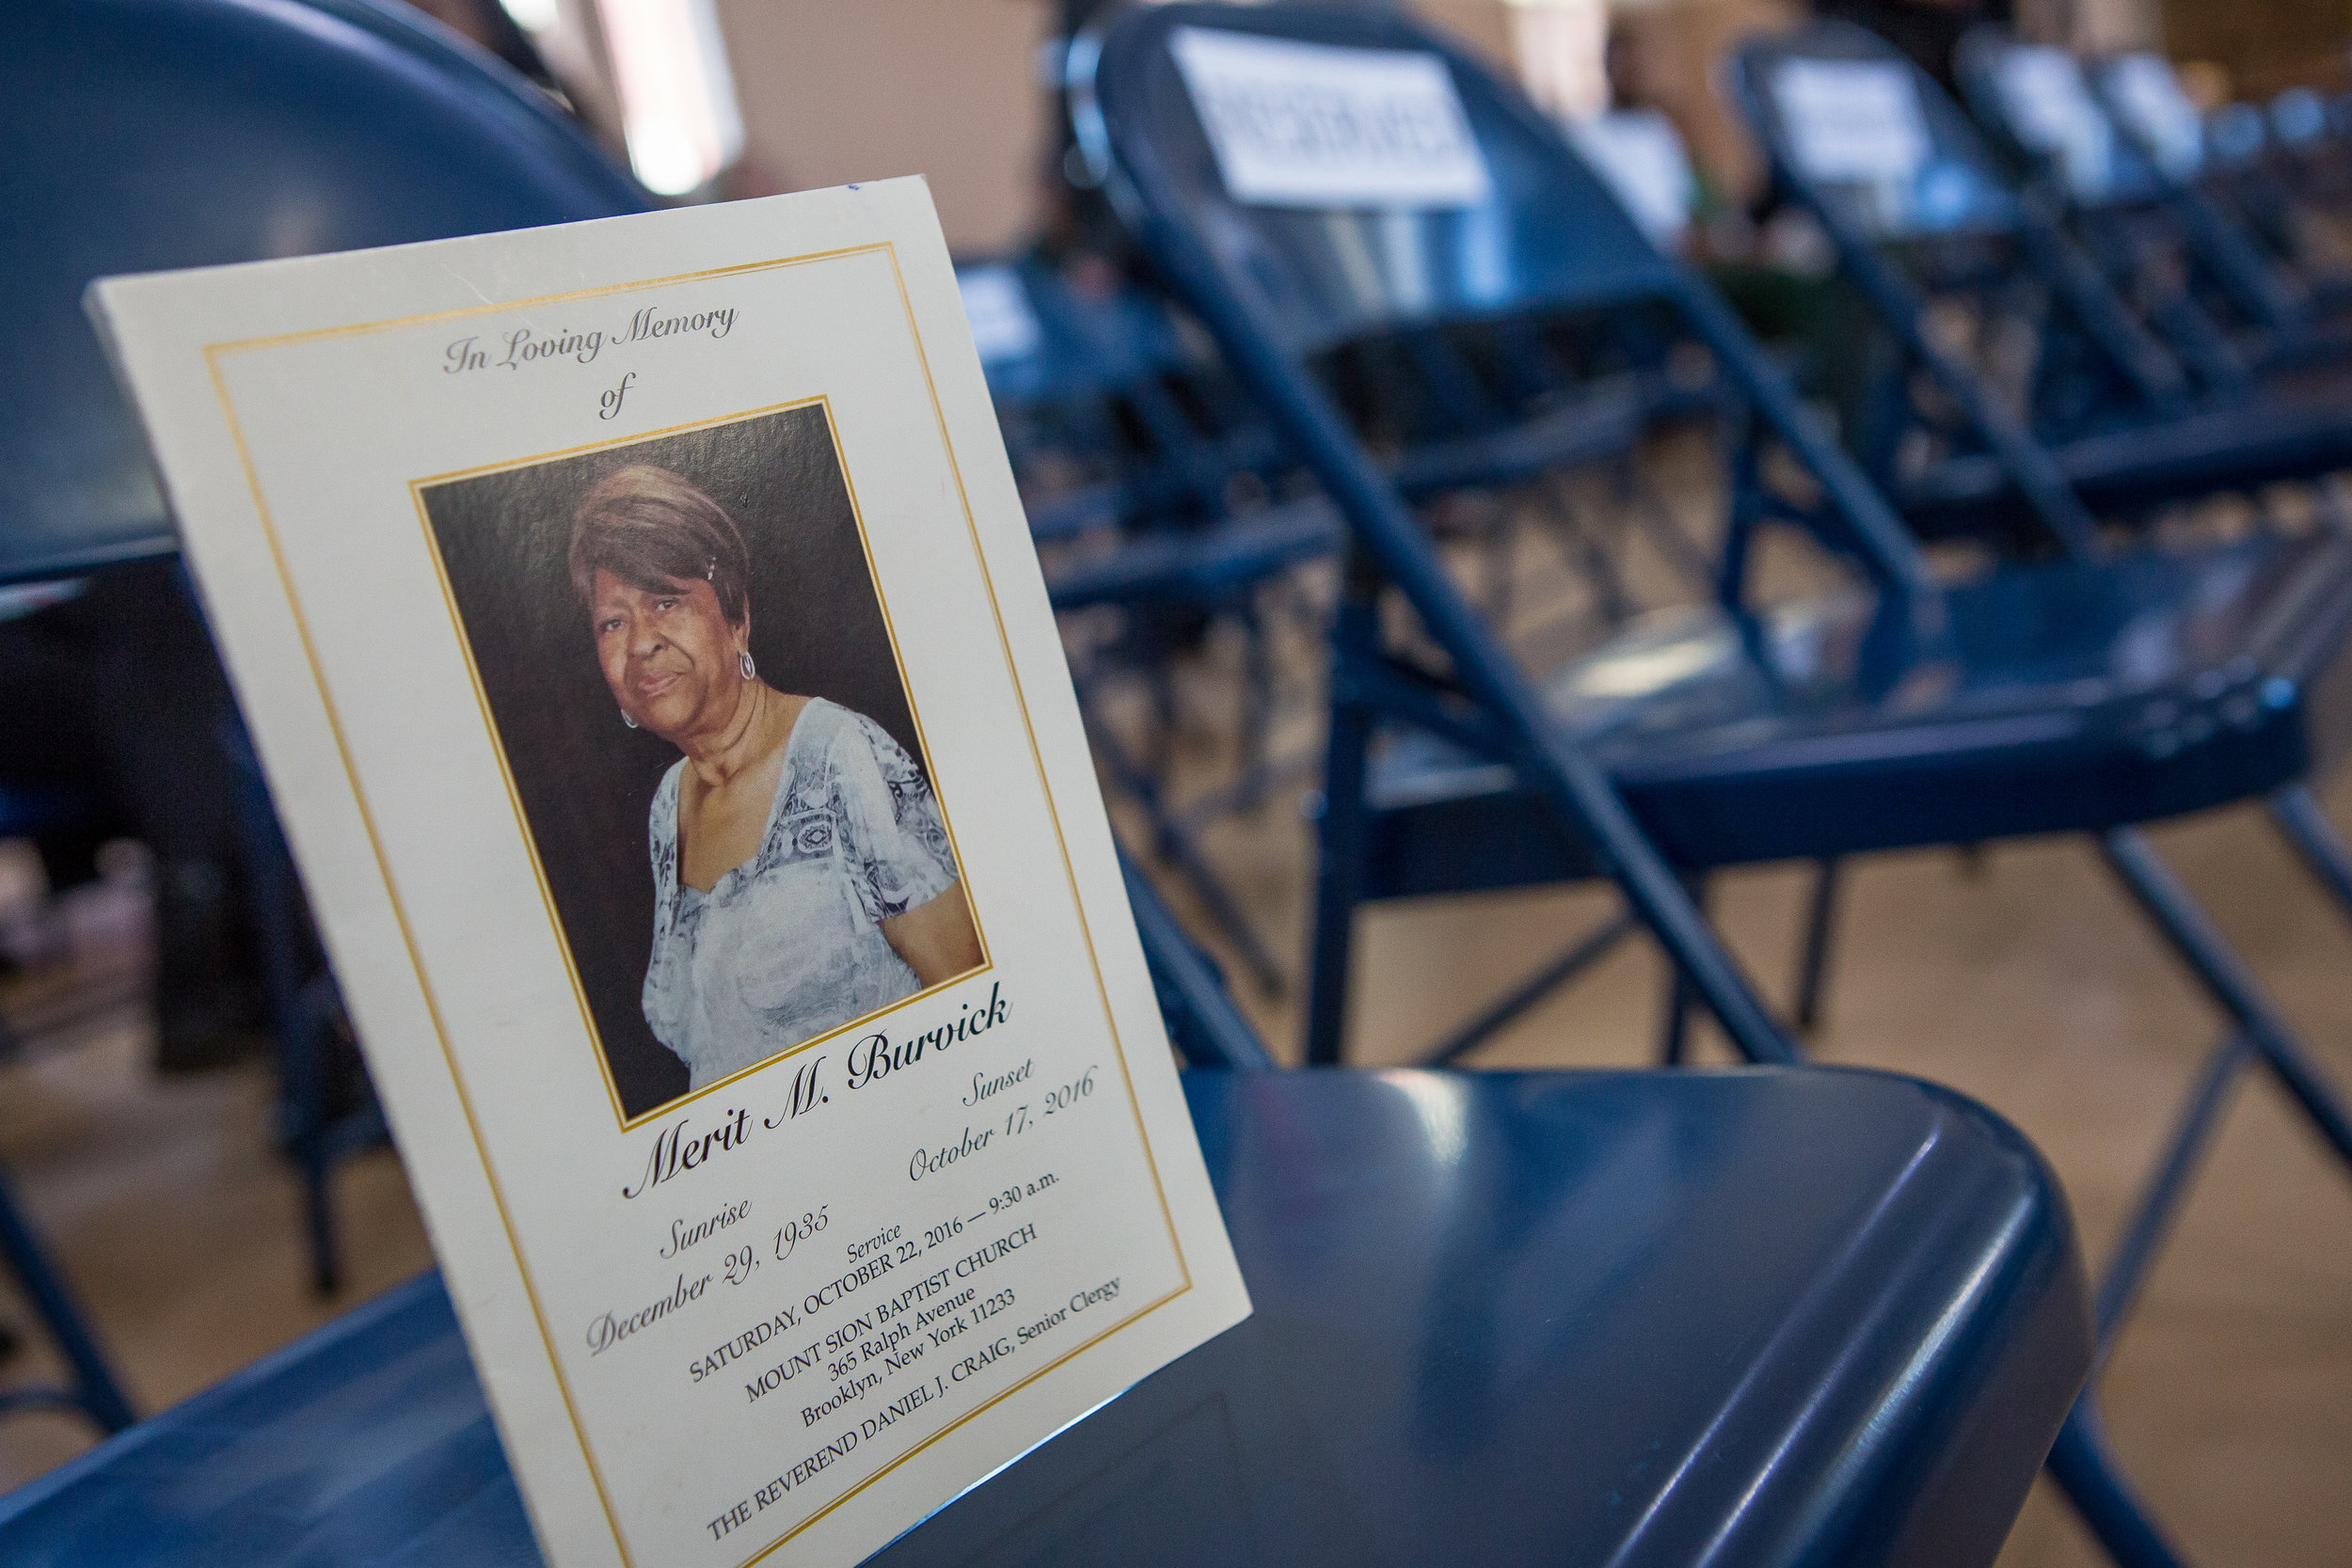  Roy placed the program from his mother's funeral on a seat at his graduation. 